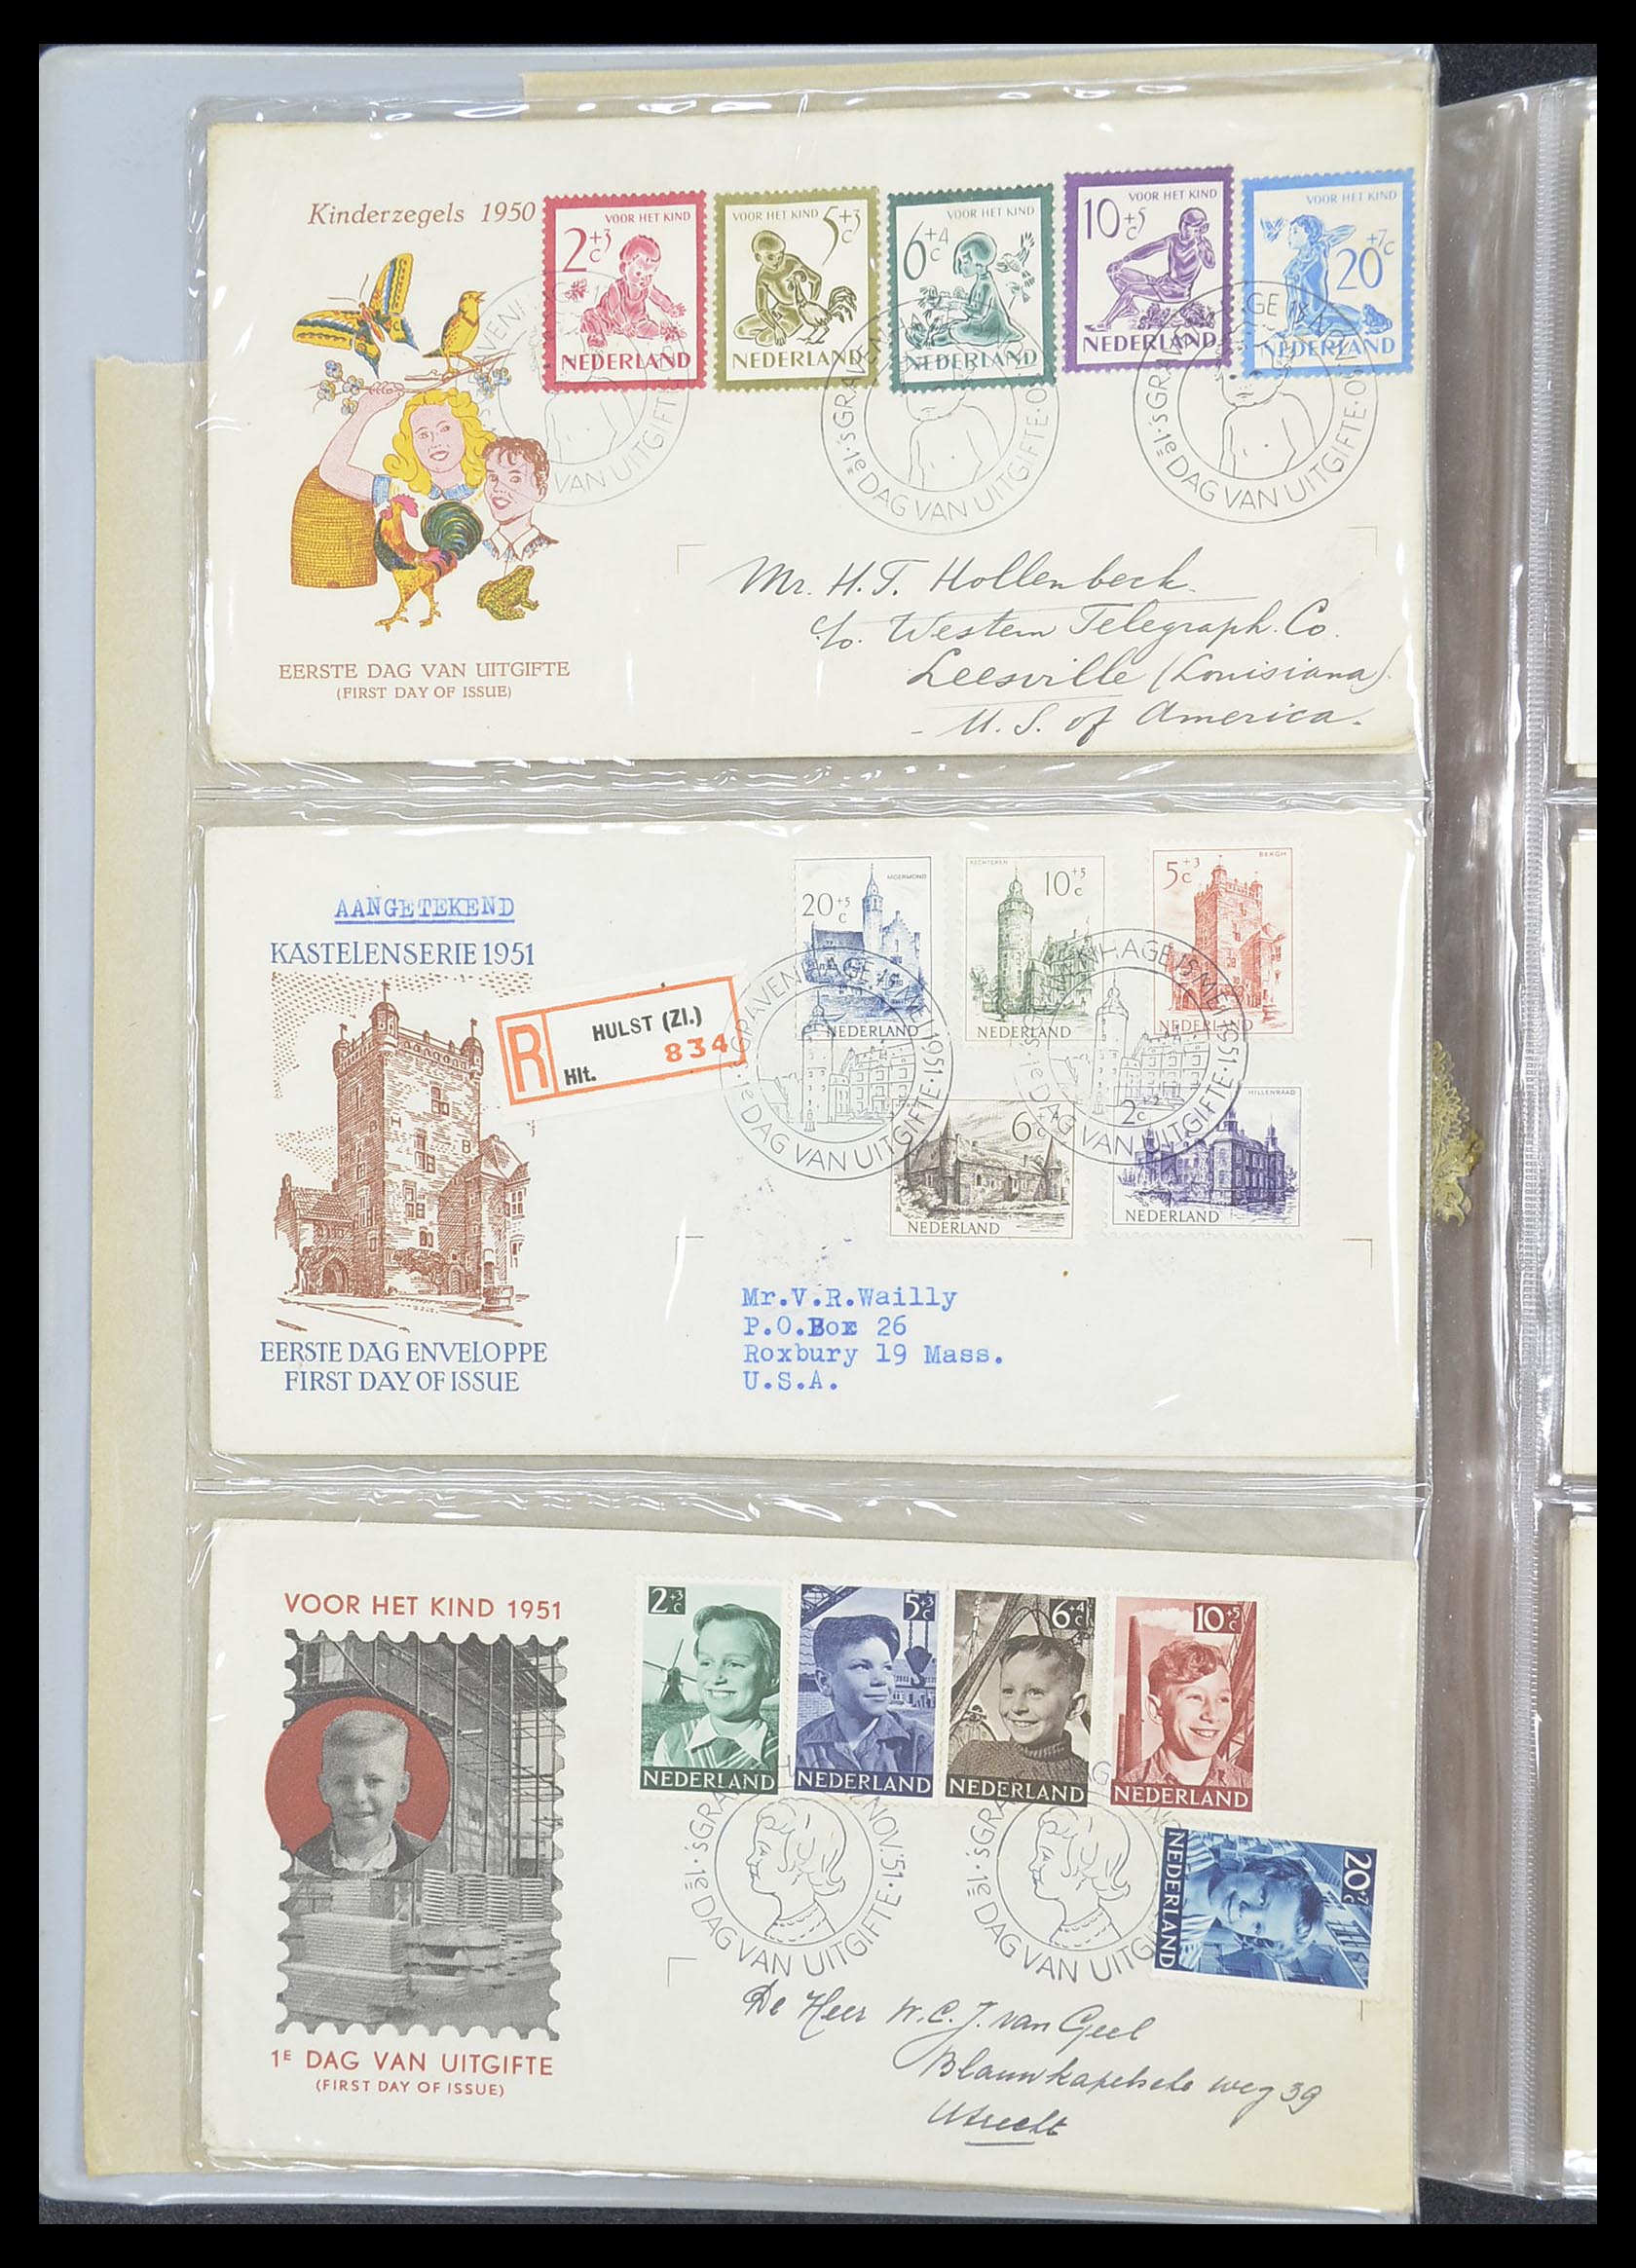 33369 002 - Stamp collection 33369 Netherlands FDC's 1950-1989.